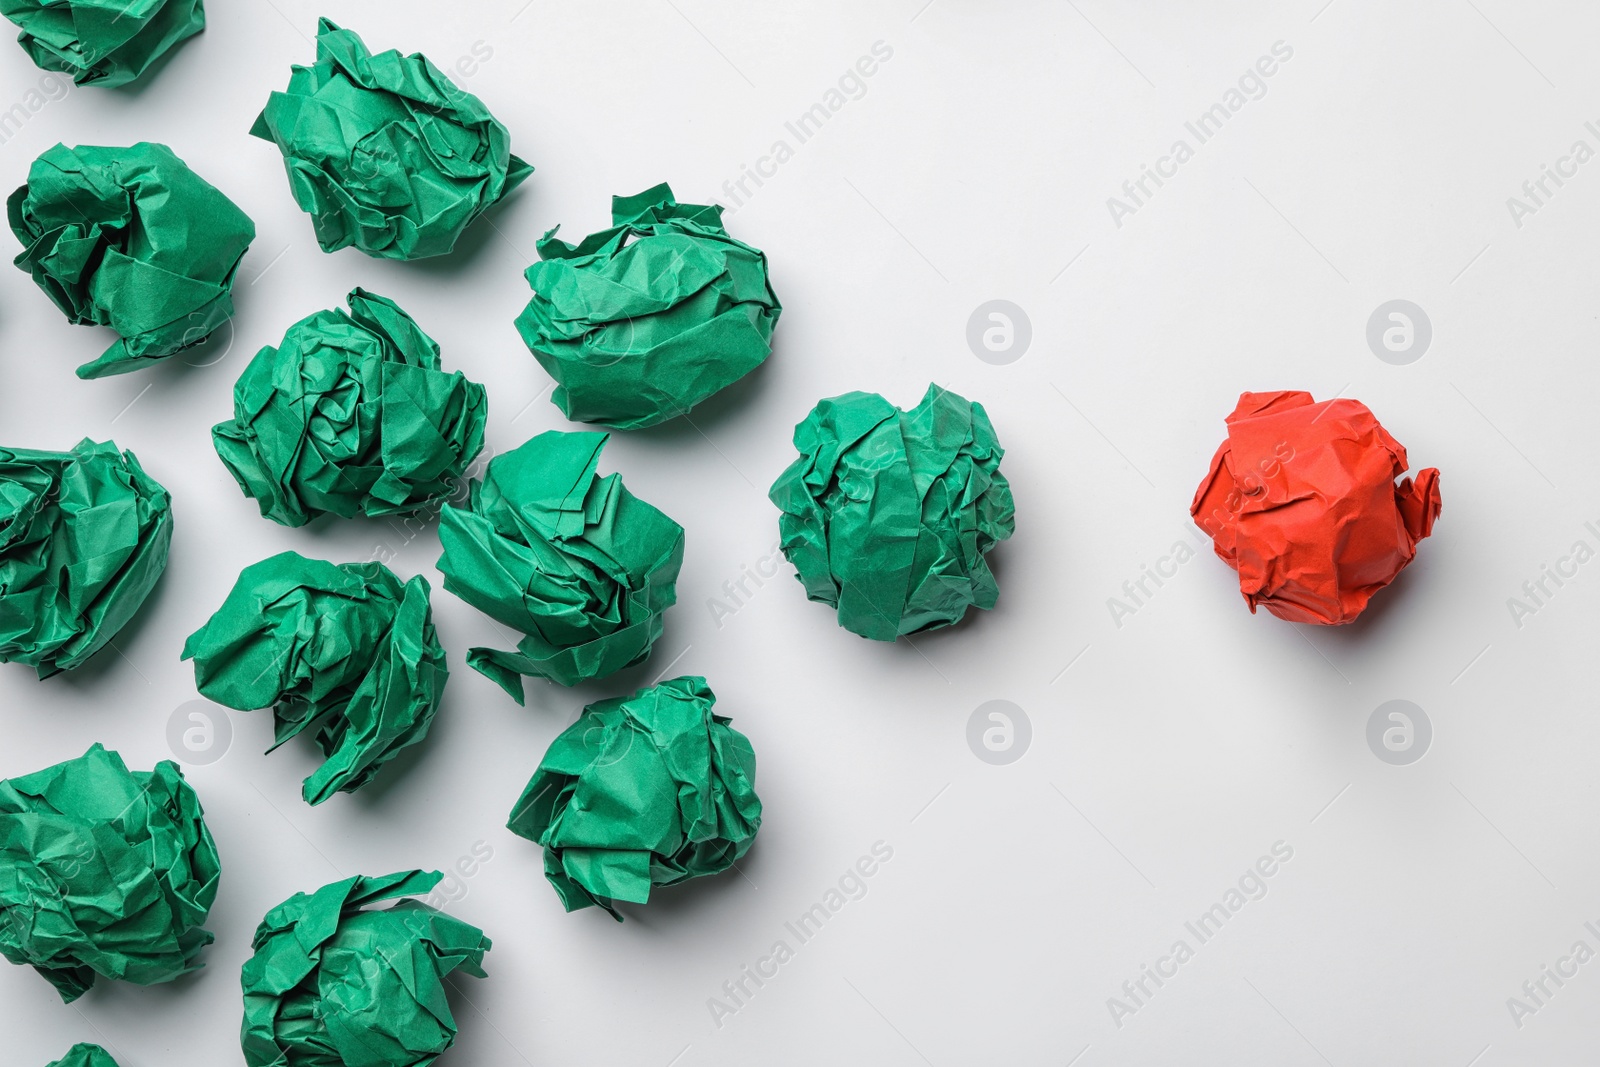 Photo of Green balls of crumpled paper following red one on white background, top view. Leadership concept